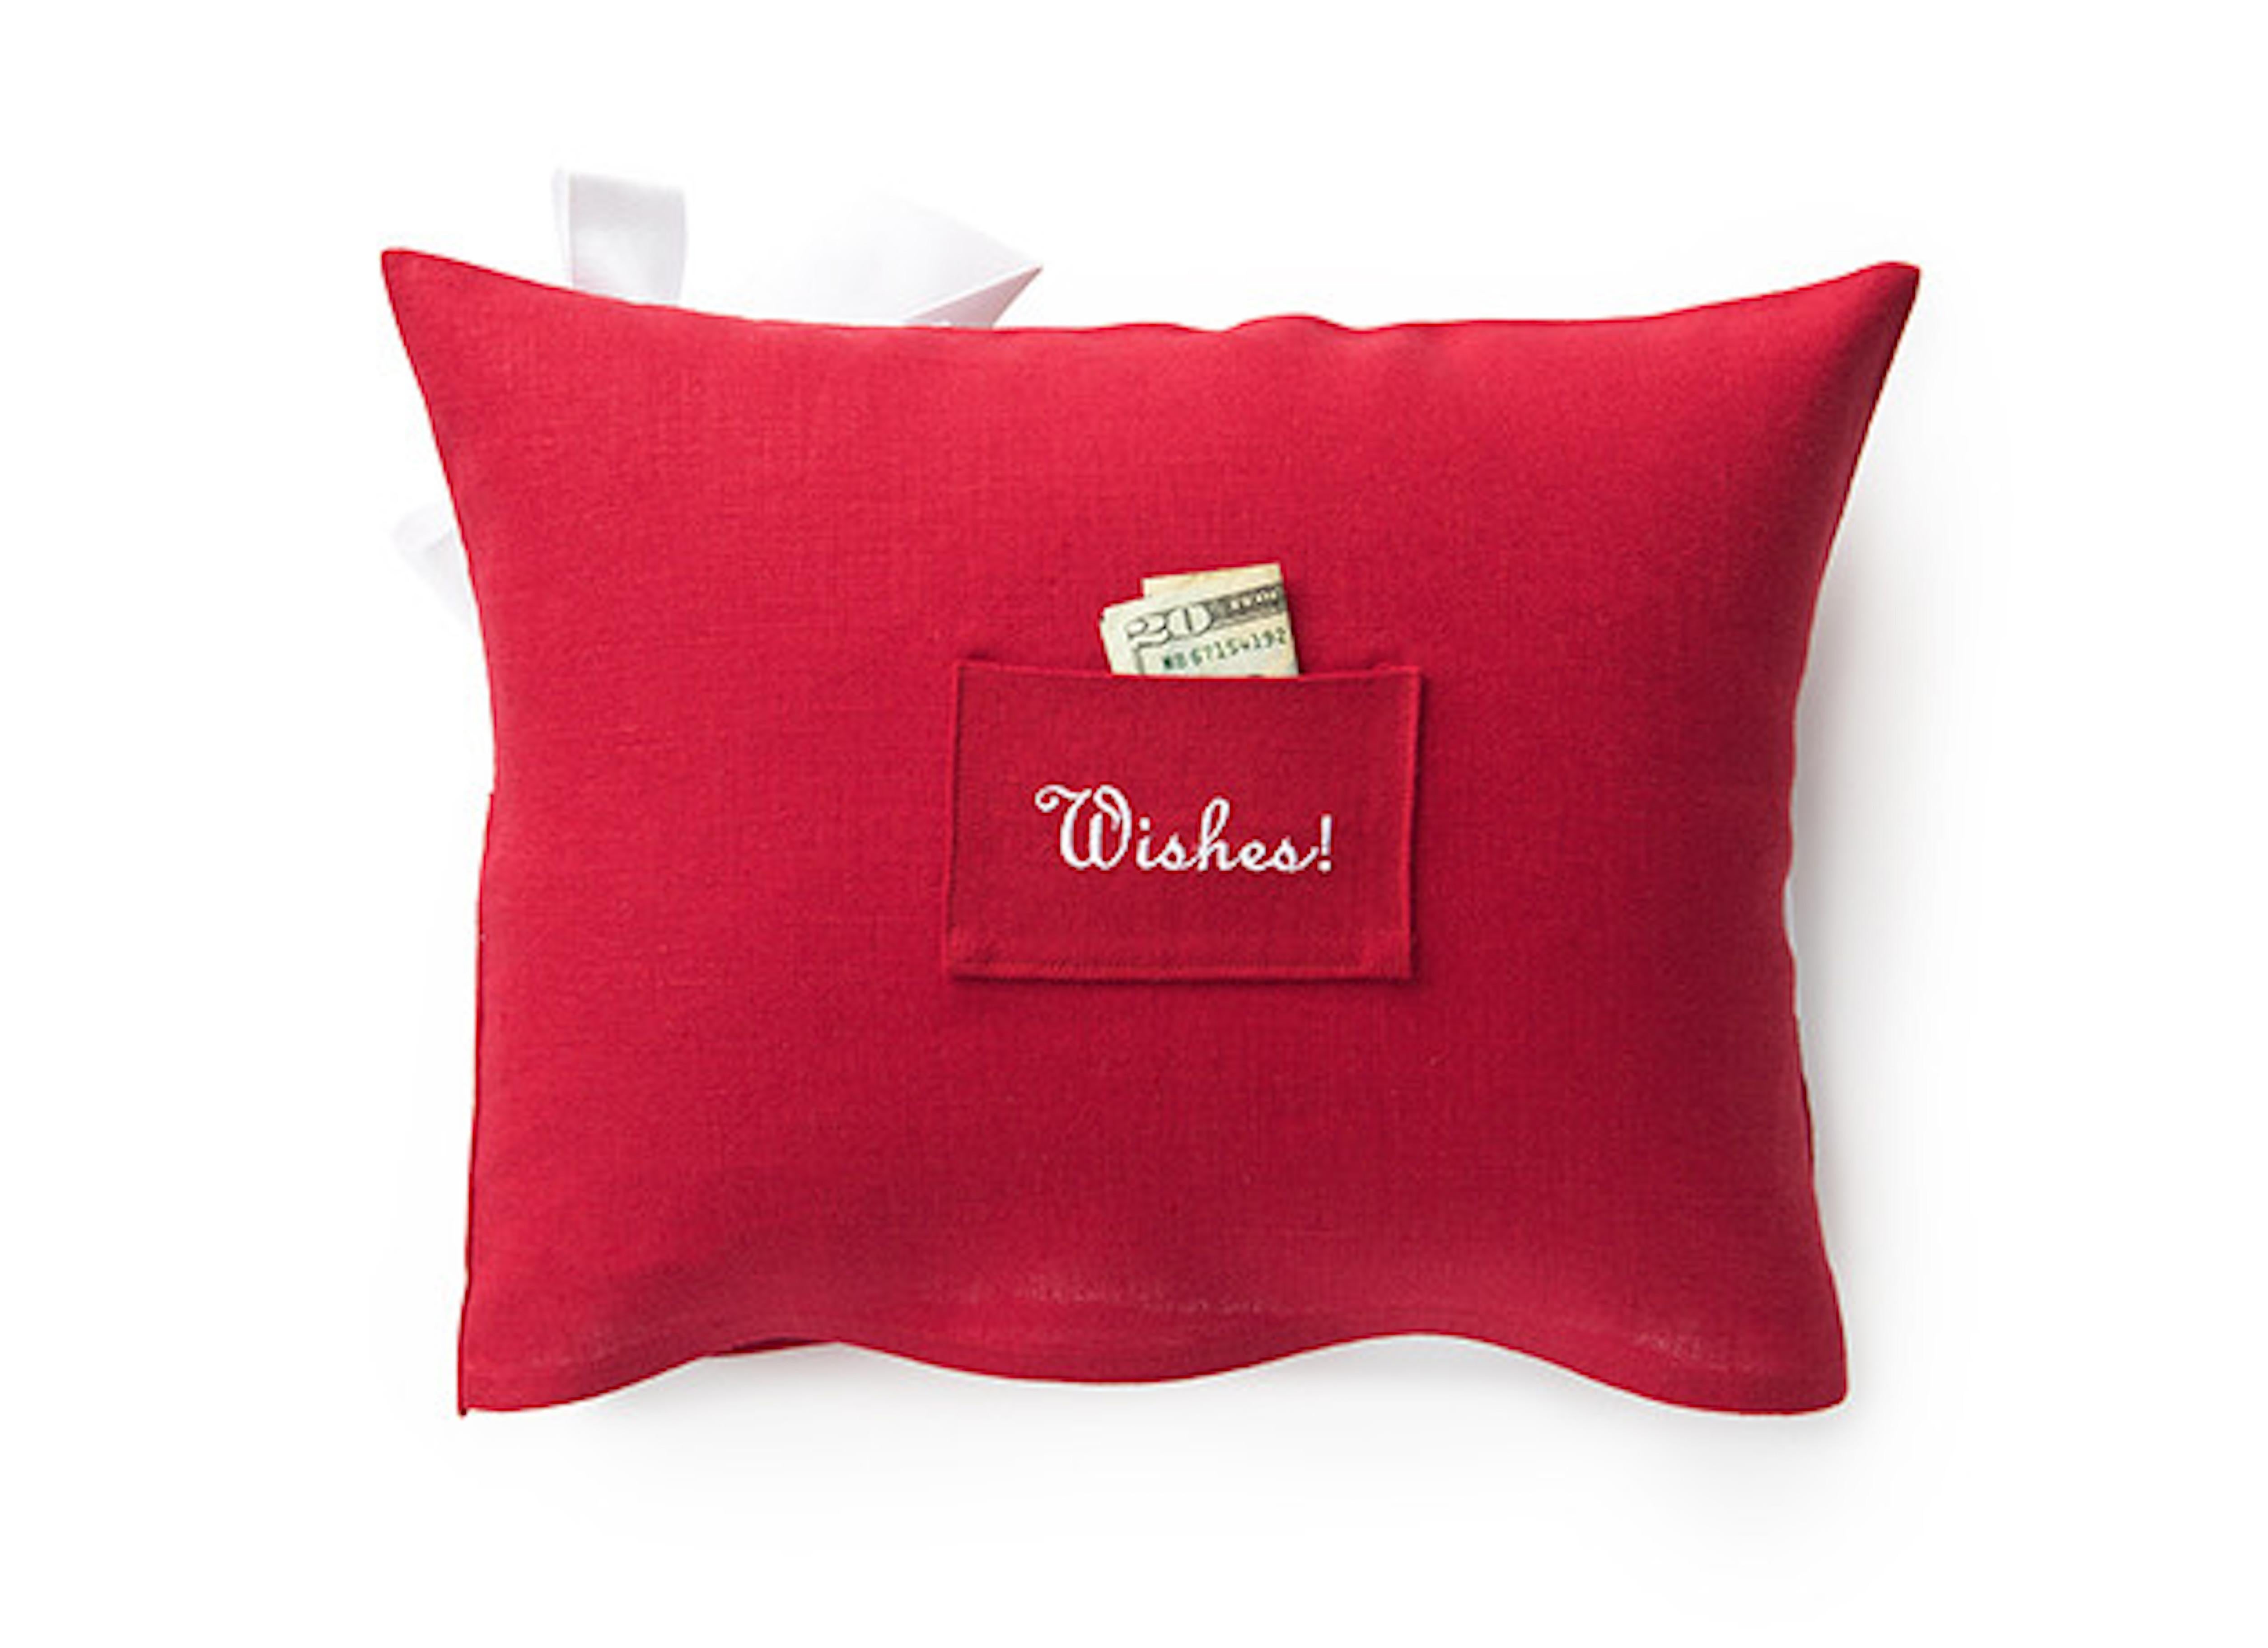 A darling holiday gift for any child. Features a removable mouse friend. A little pocket on the underside of the pillow is perfect for Santa's list or gift! 

Microfiber hypoallergenic pillow filler included. 

Finished size is 12